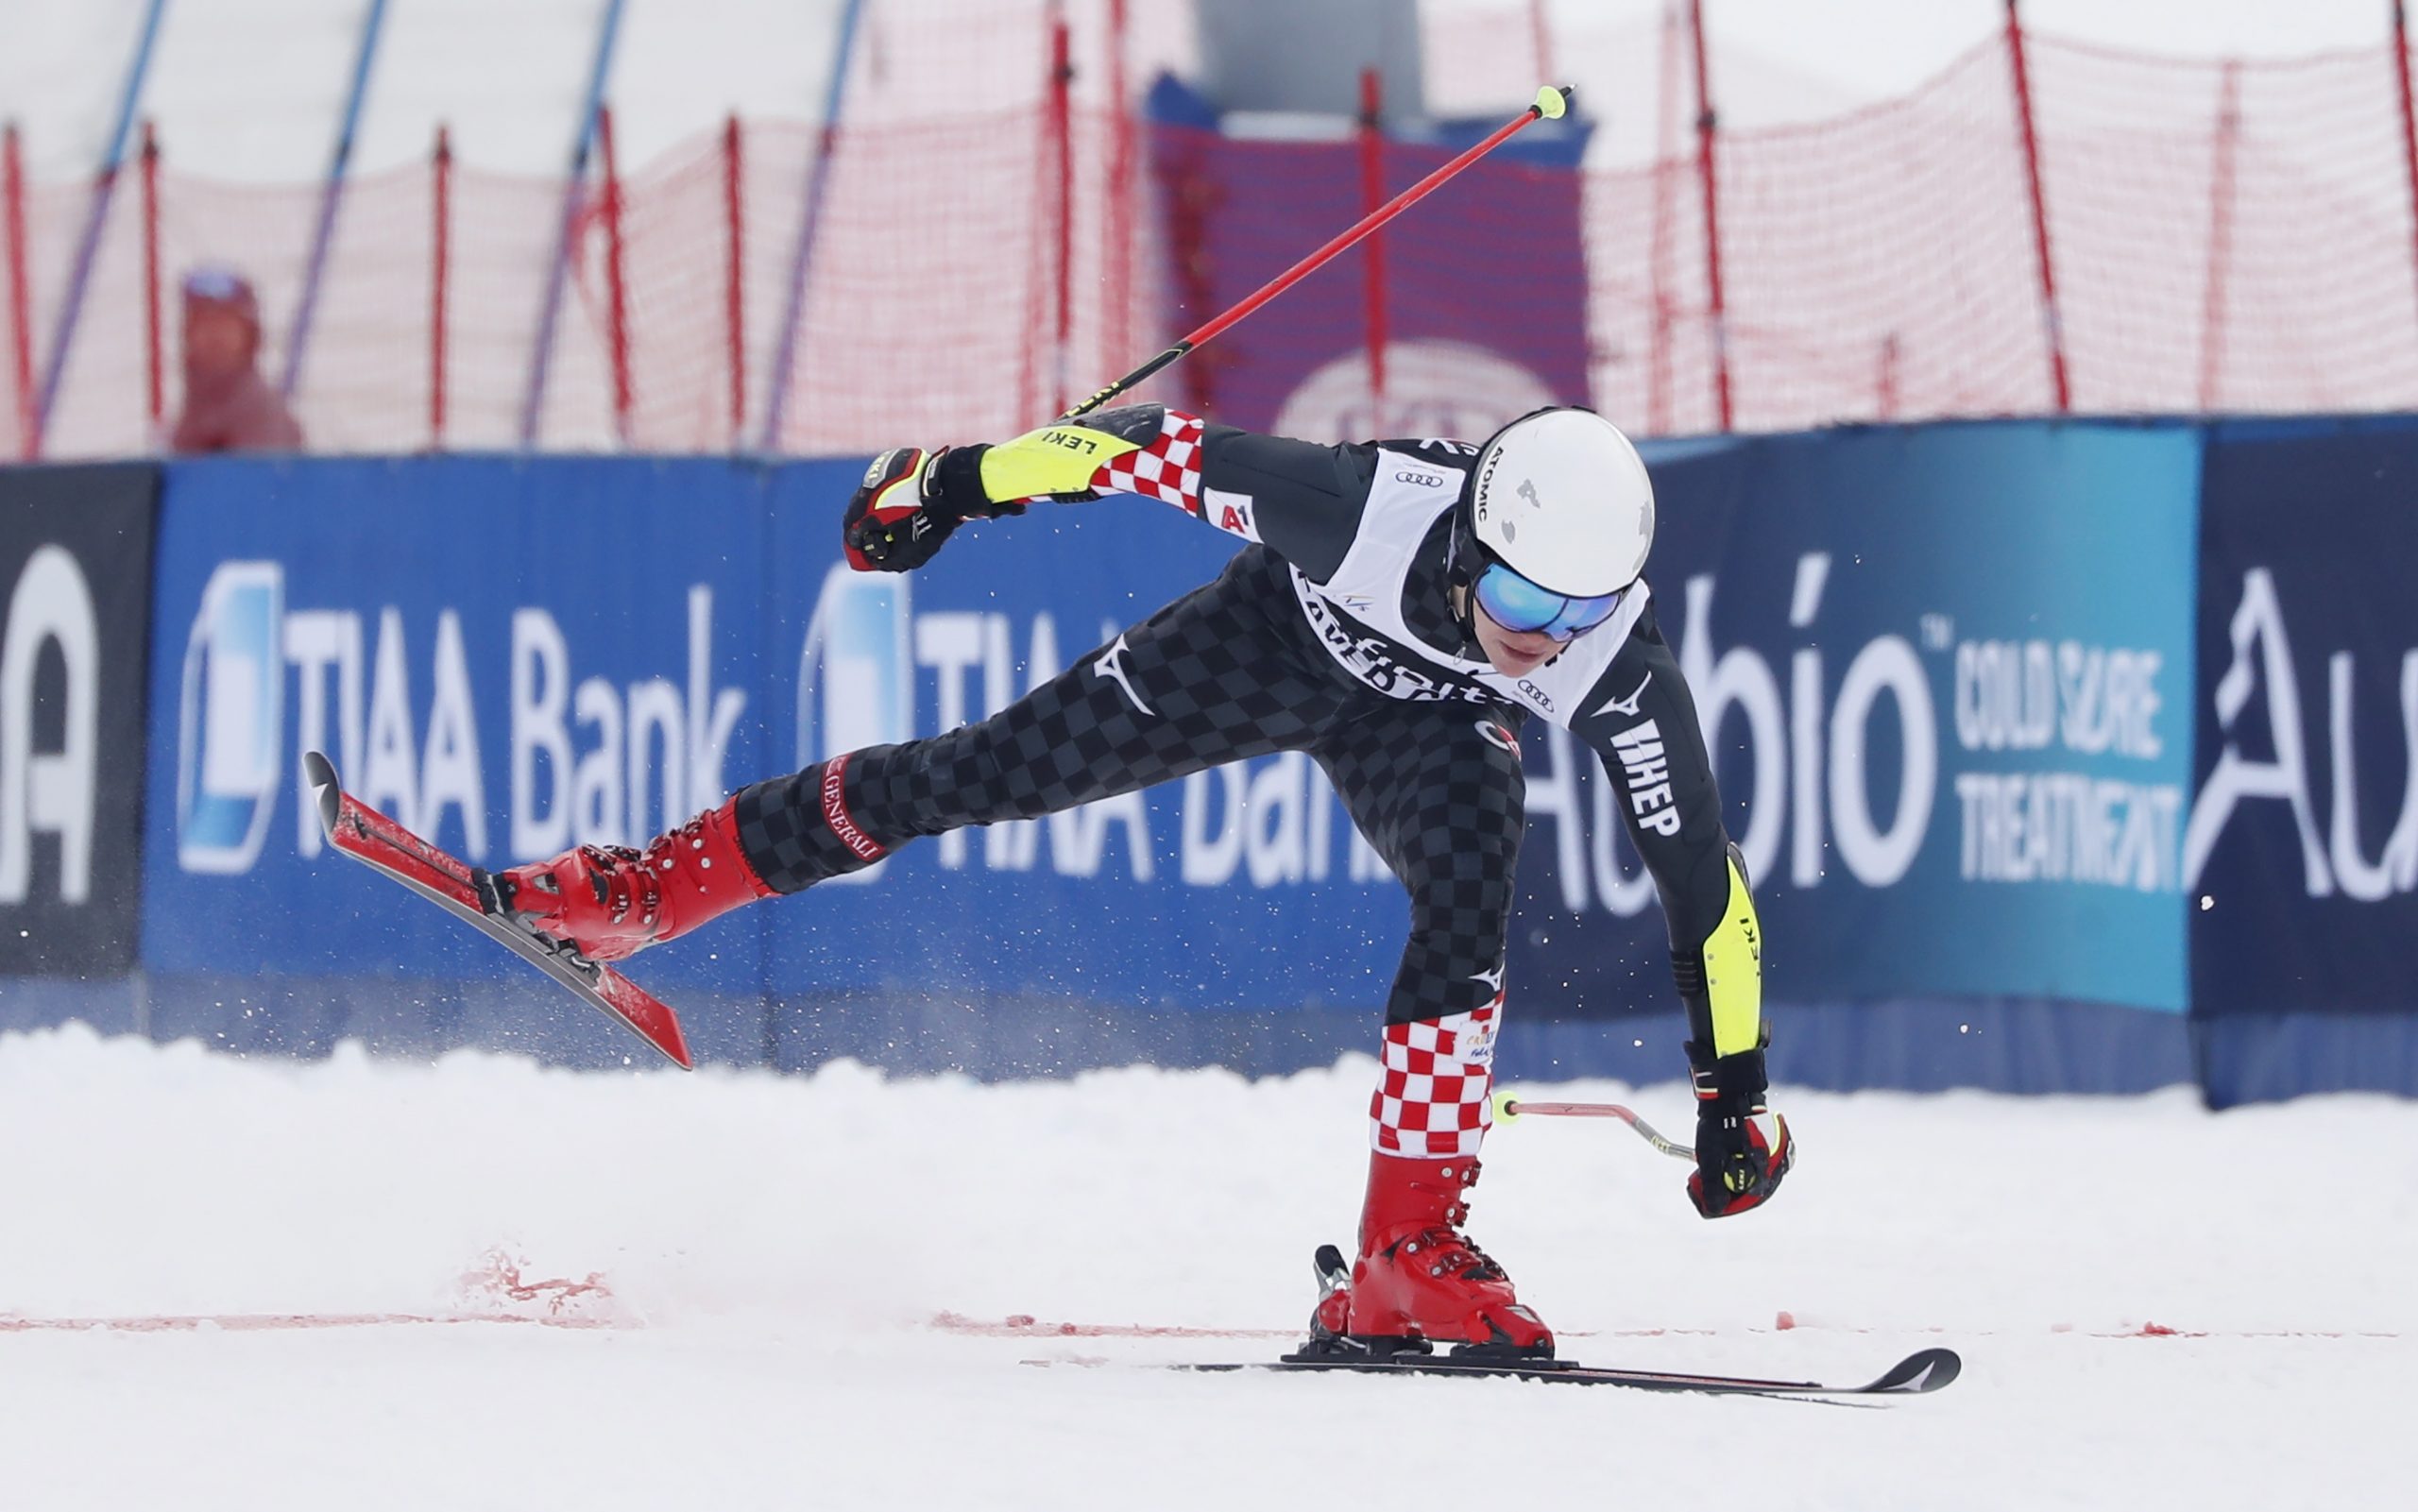 epa08055739 Filip Zubcic of Croatia in the finish area during the second run of the Men’s Giant Slalom at the FIS Alpine Skiing World Cup in Beaver Creek, Colorado, USA, 08 December 2019.  EPA/JOHN G. MABANGLO